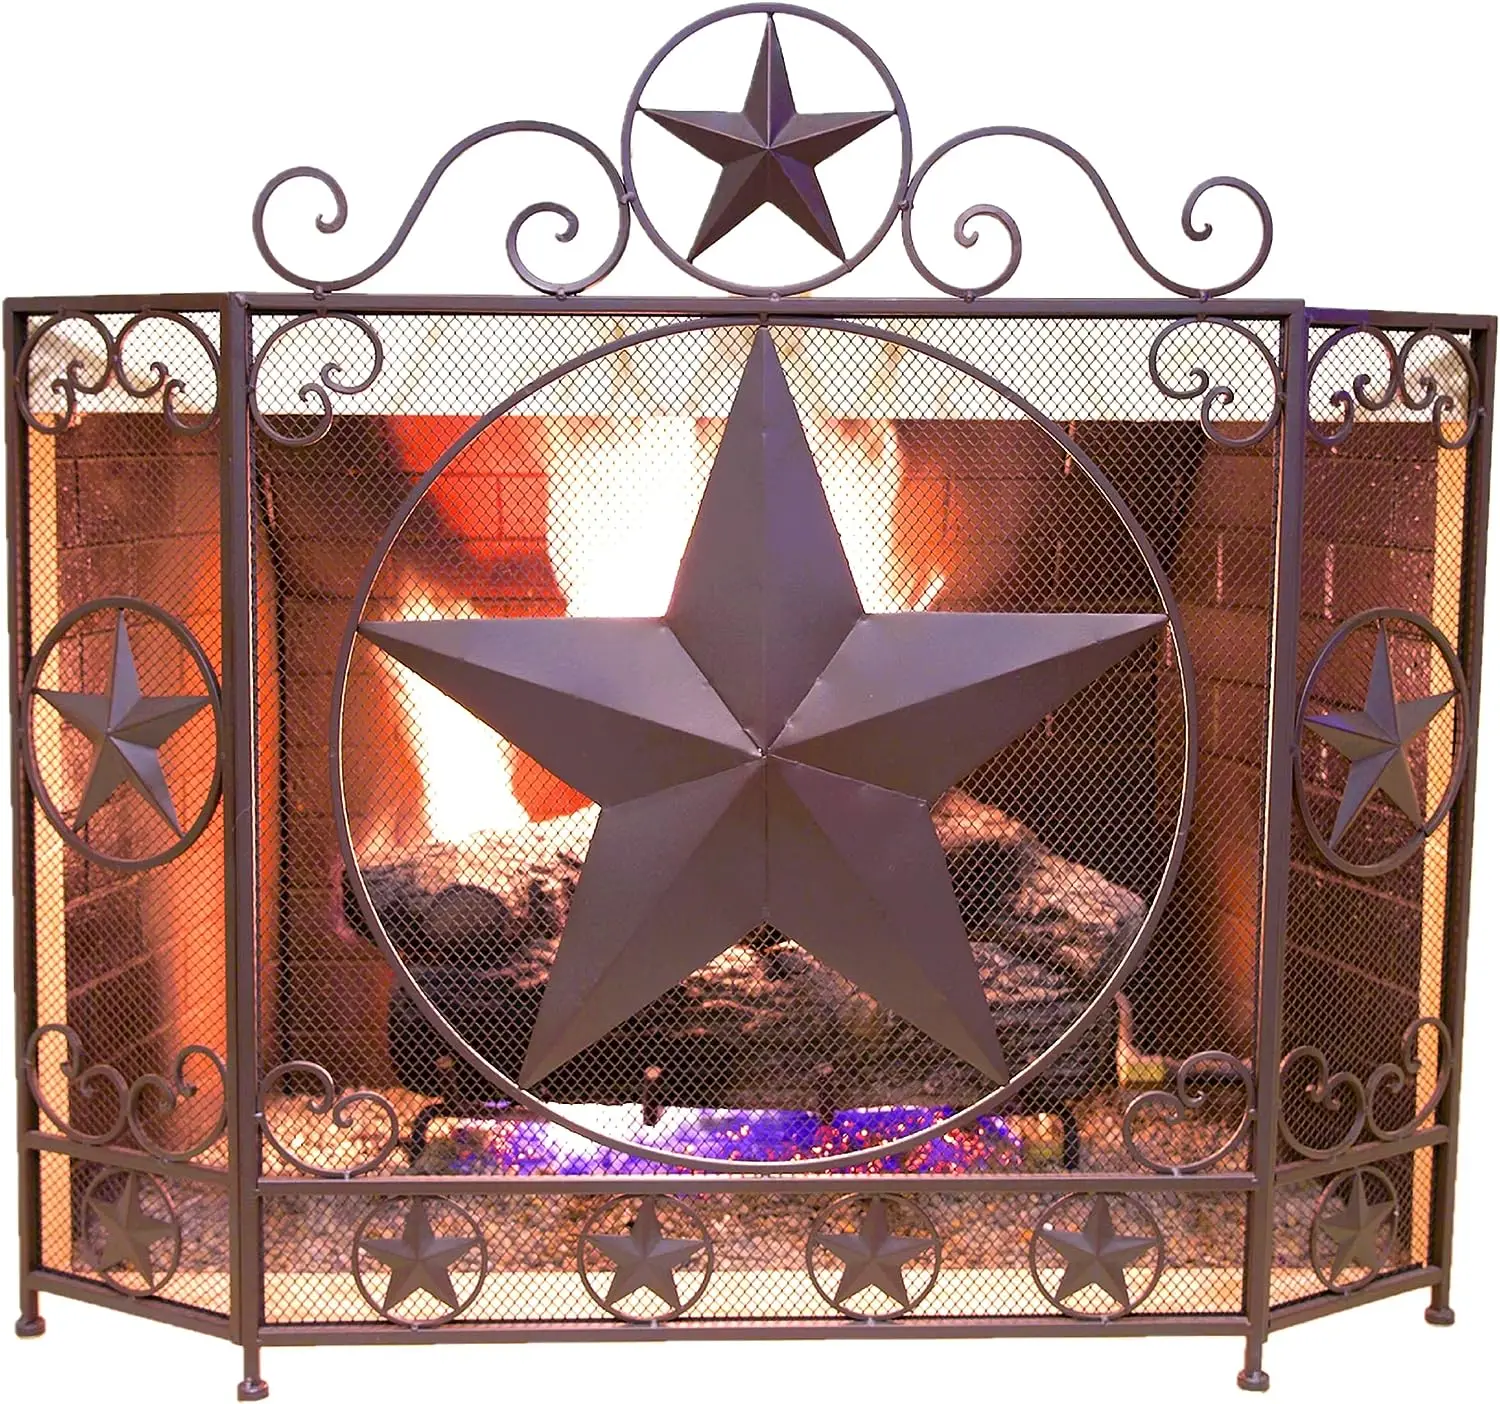 

Metal Foldable Fireplace Screen with Star in Brown Metal Mesh Rustic Western Country Style